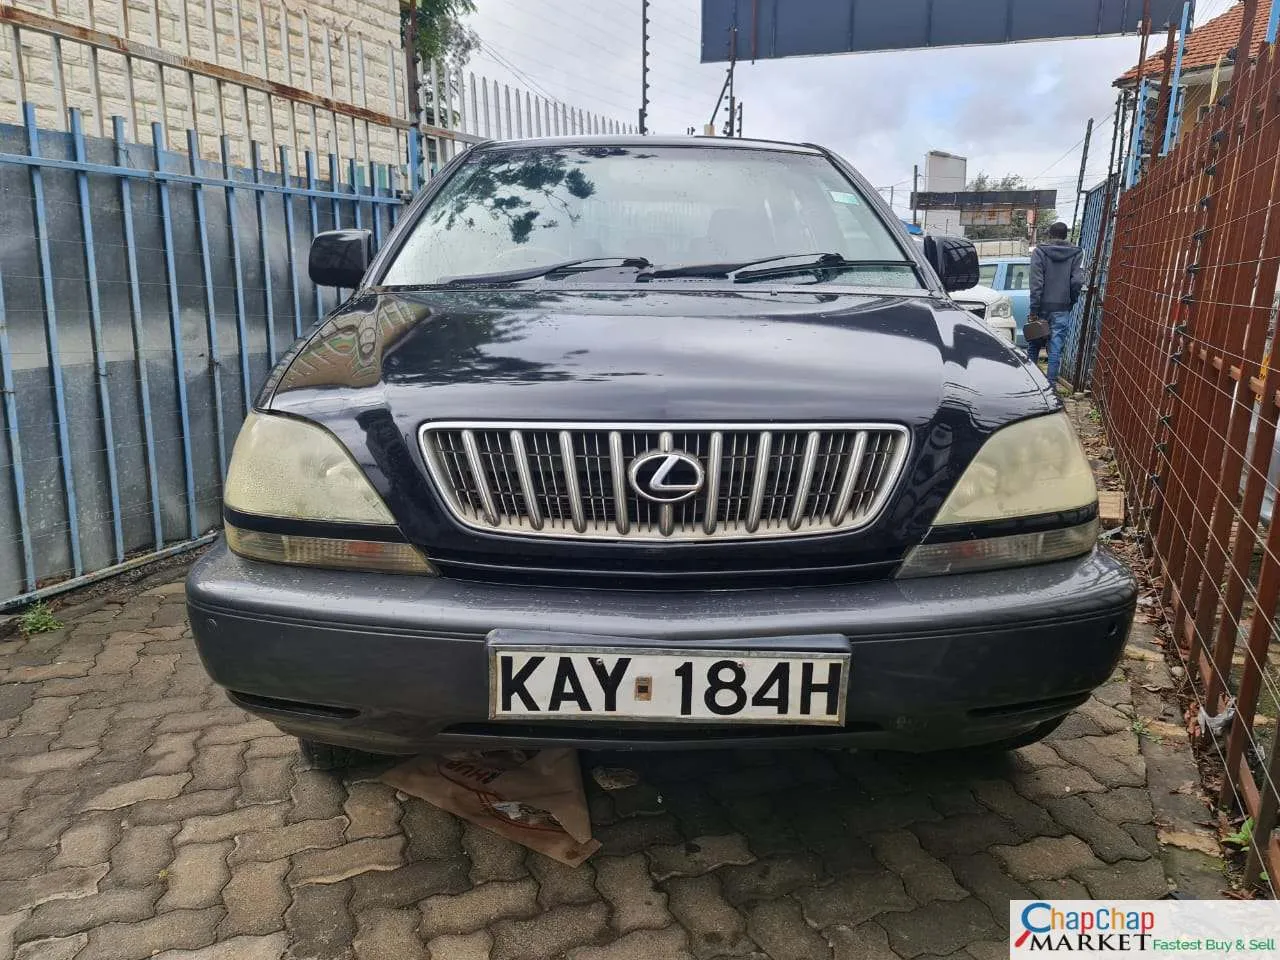 LEXUS RX 300 Asian Owner 500k ONLY You Pay 30% Deposit Trade in OK EXCLUSIVE For Sale in Kenya